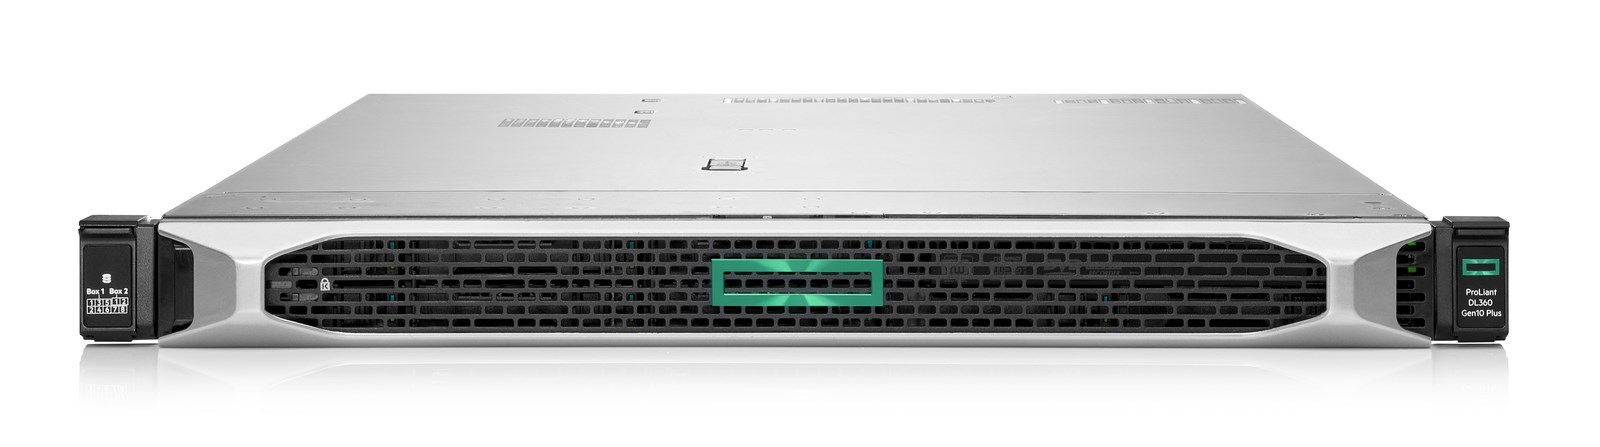 HPE DL360 G10+ 5315Y 1P 32G NC 8SFF Zvr